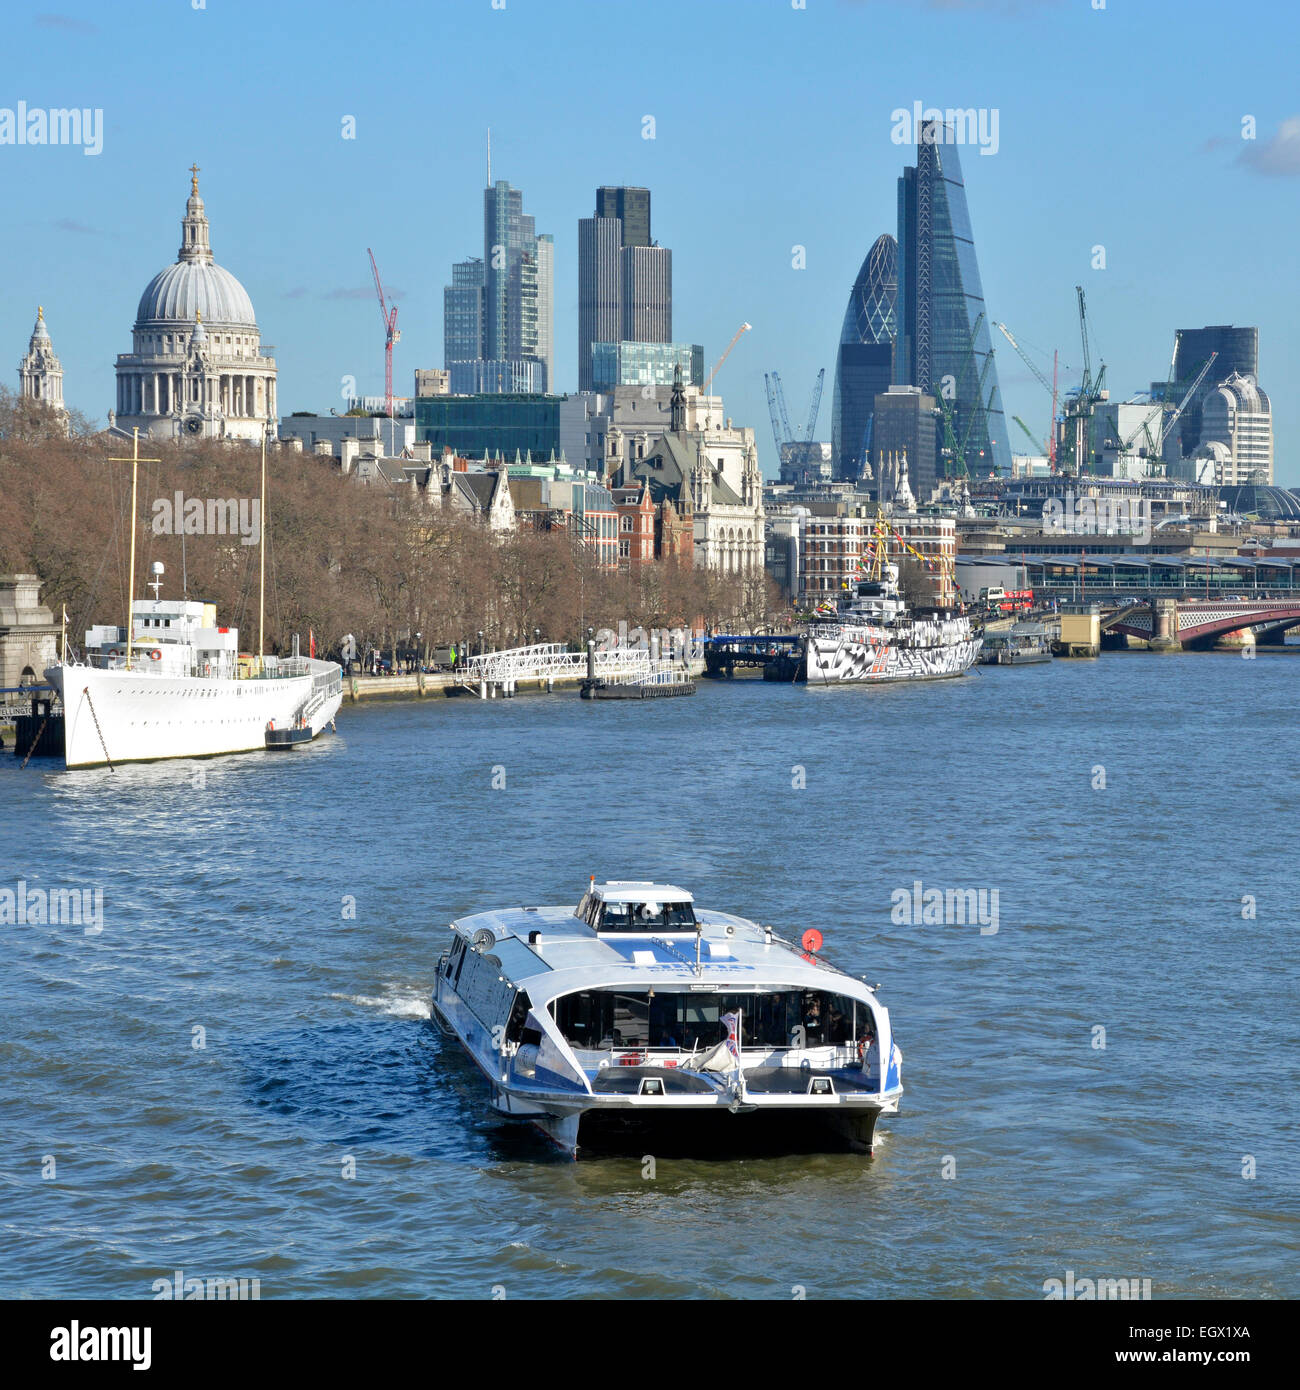 Thames clipper high speed catamaran commuter and tourist river bus service with City of London skyline beyond England UK Stock Photo